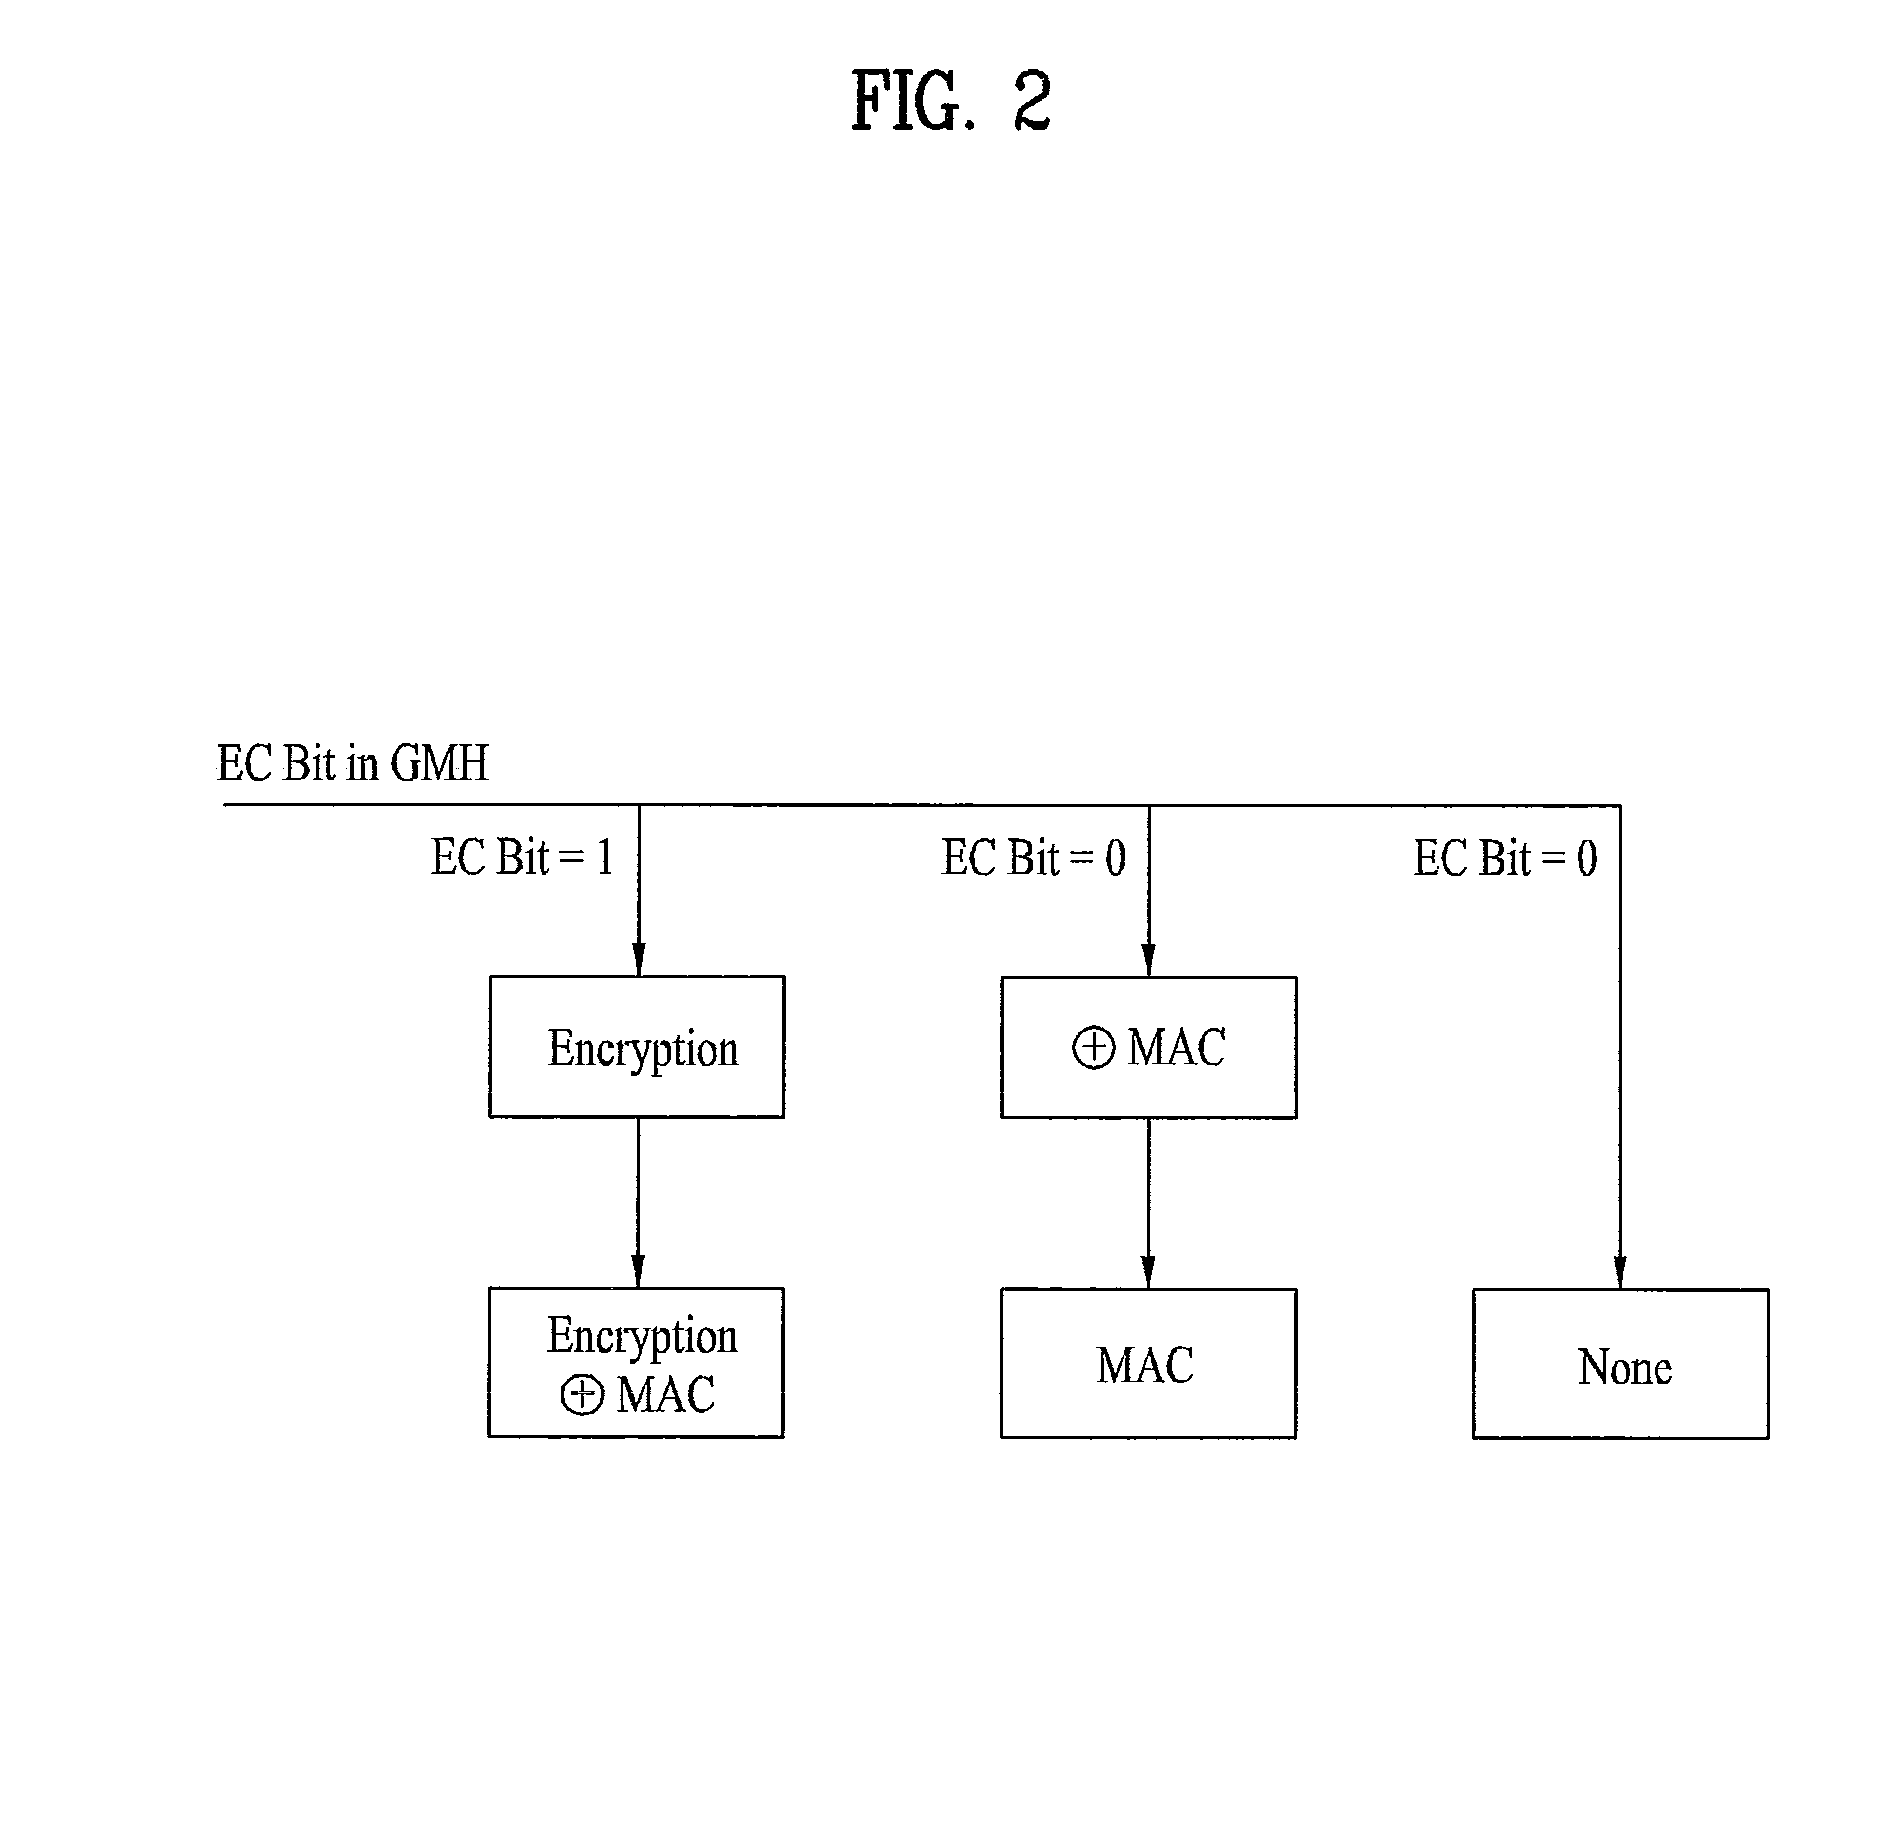 Method for selectively  encrypting control signal